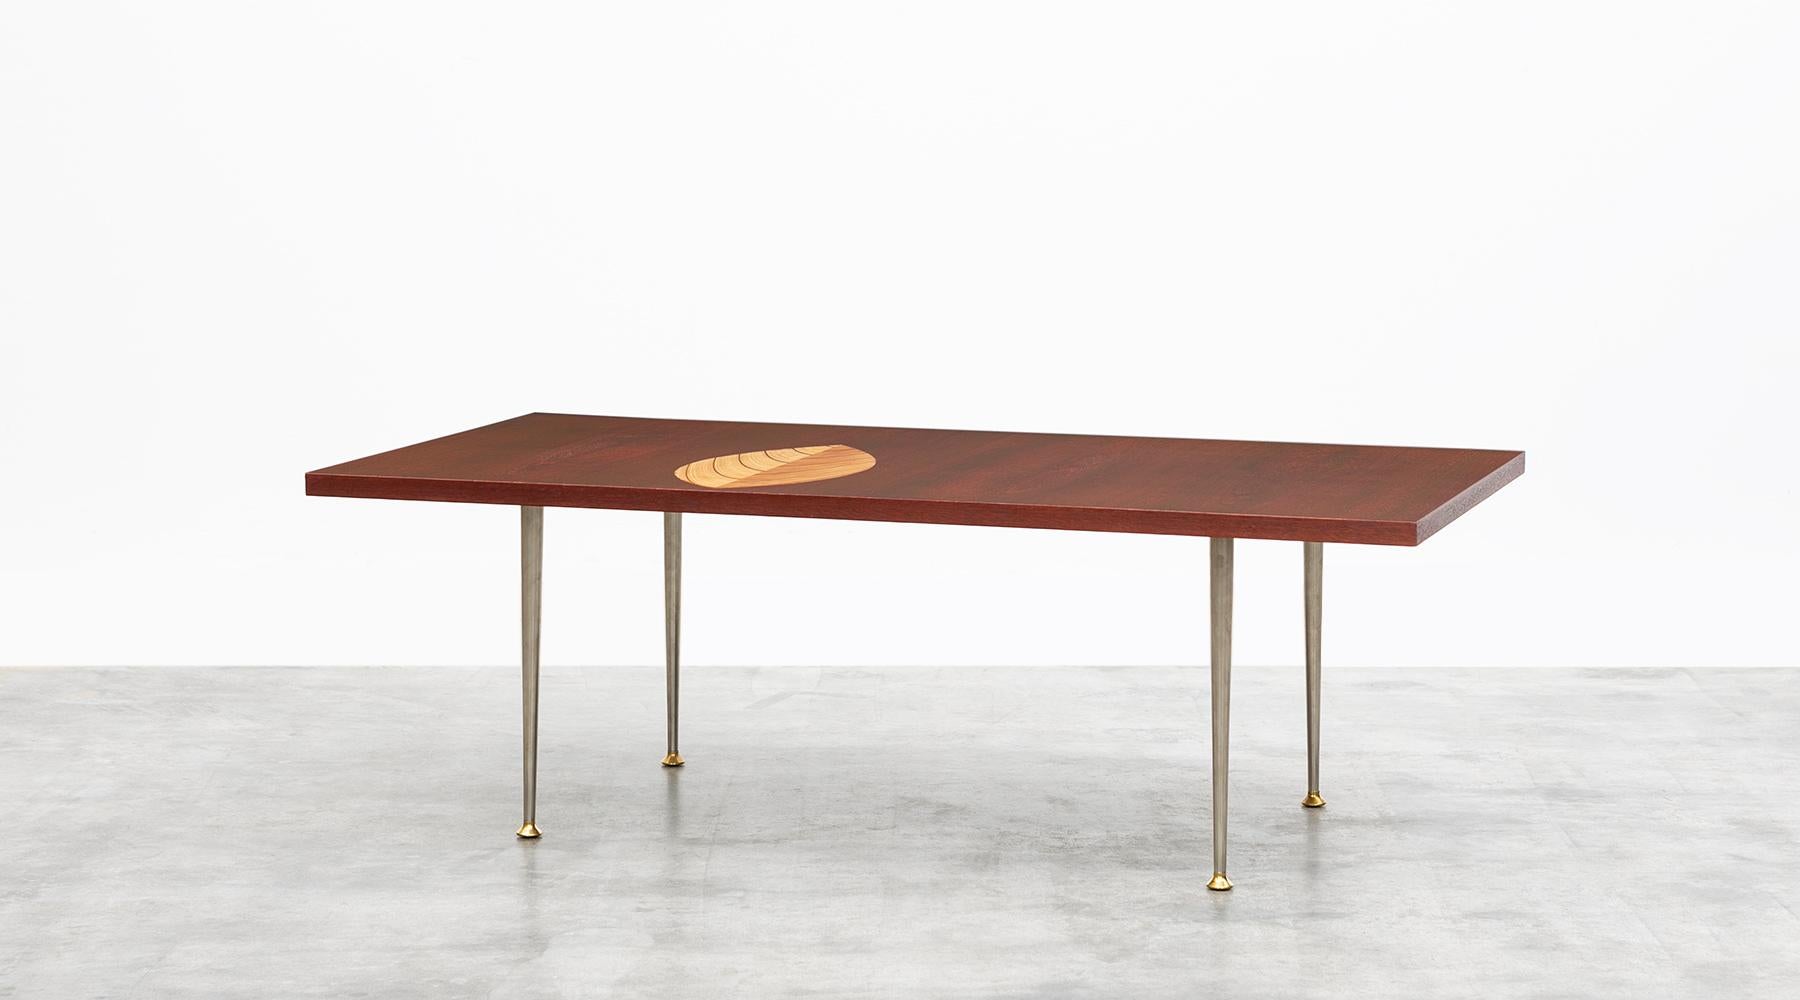 Veneered tabletop, brass base, Tapio Wirkkala for Asko, Finland, 1958.

Fantastic coffee table designed by Tapio Wirkkala in 1958. The veneered tabletop comes with a wooden inlay in leaf ornament on a metal base. Manufactured by Asko.
Similar